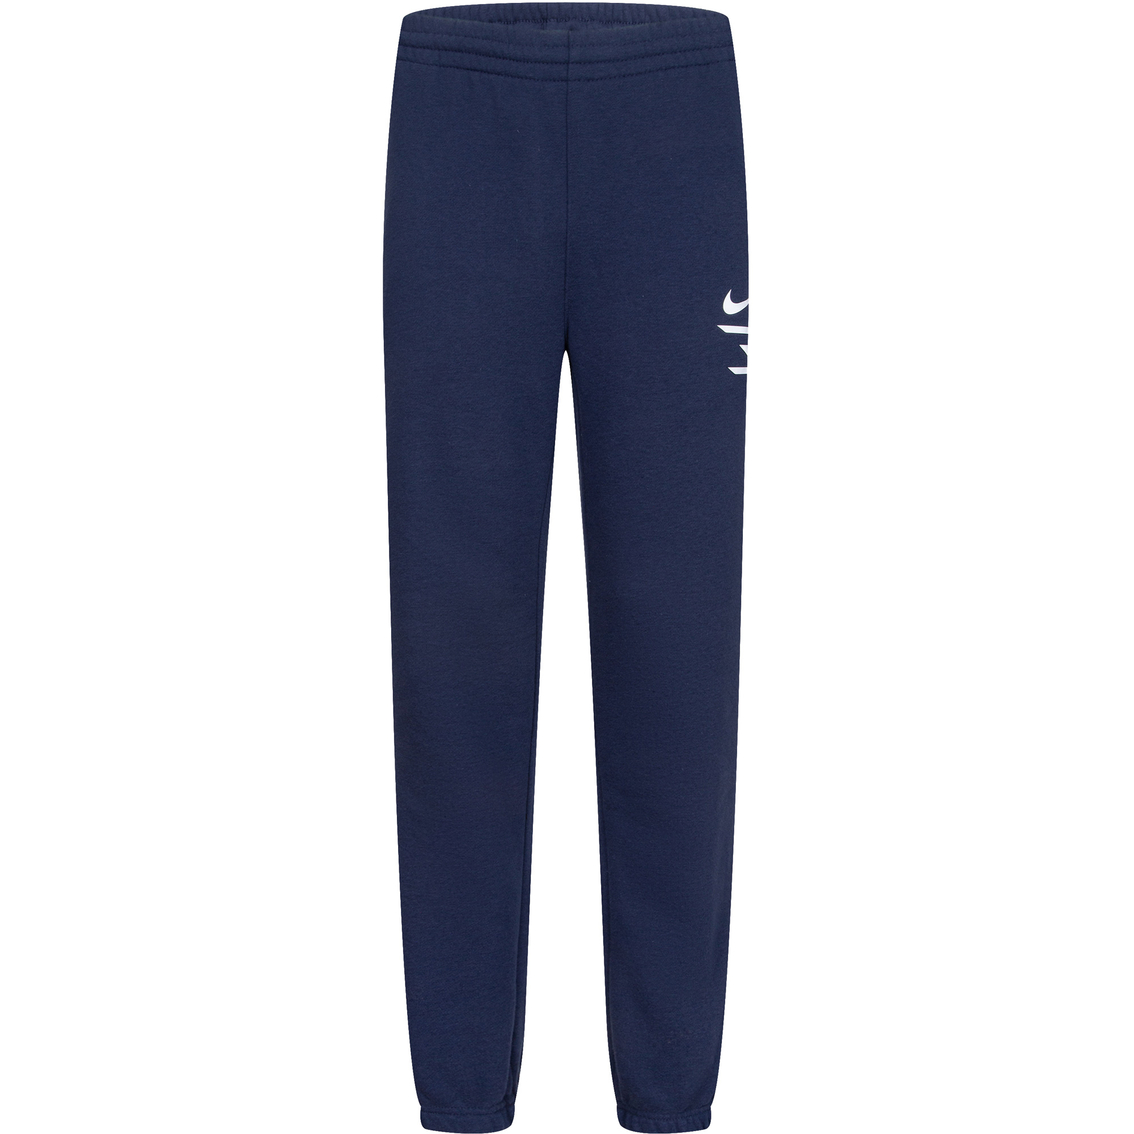 3BRAND By Russell Wilson Boys Joggers - Image 1 of 6